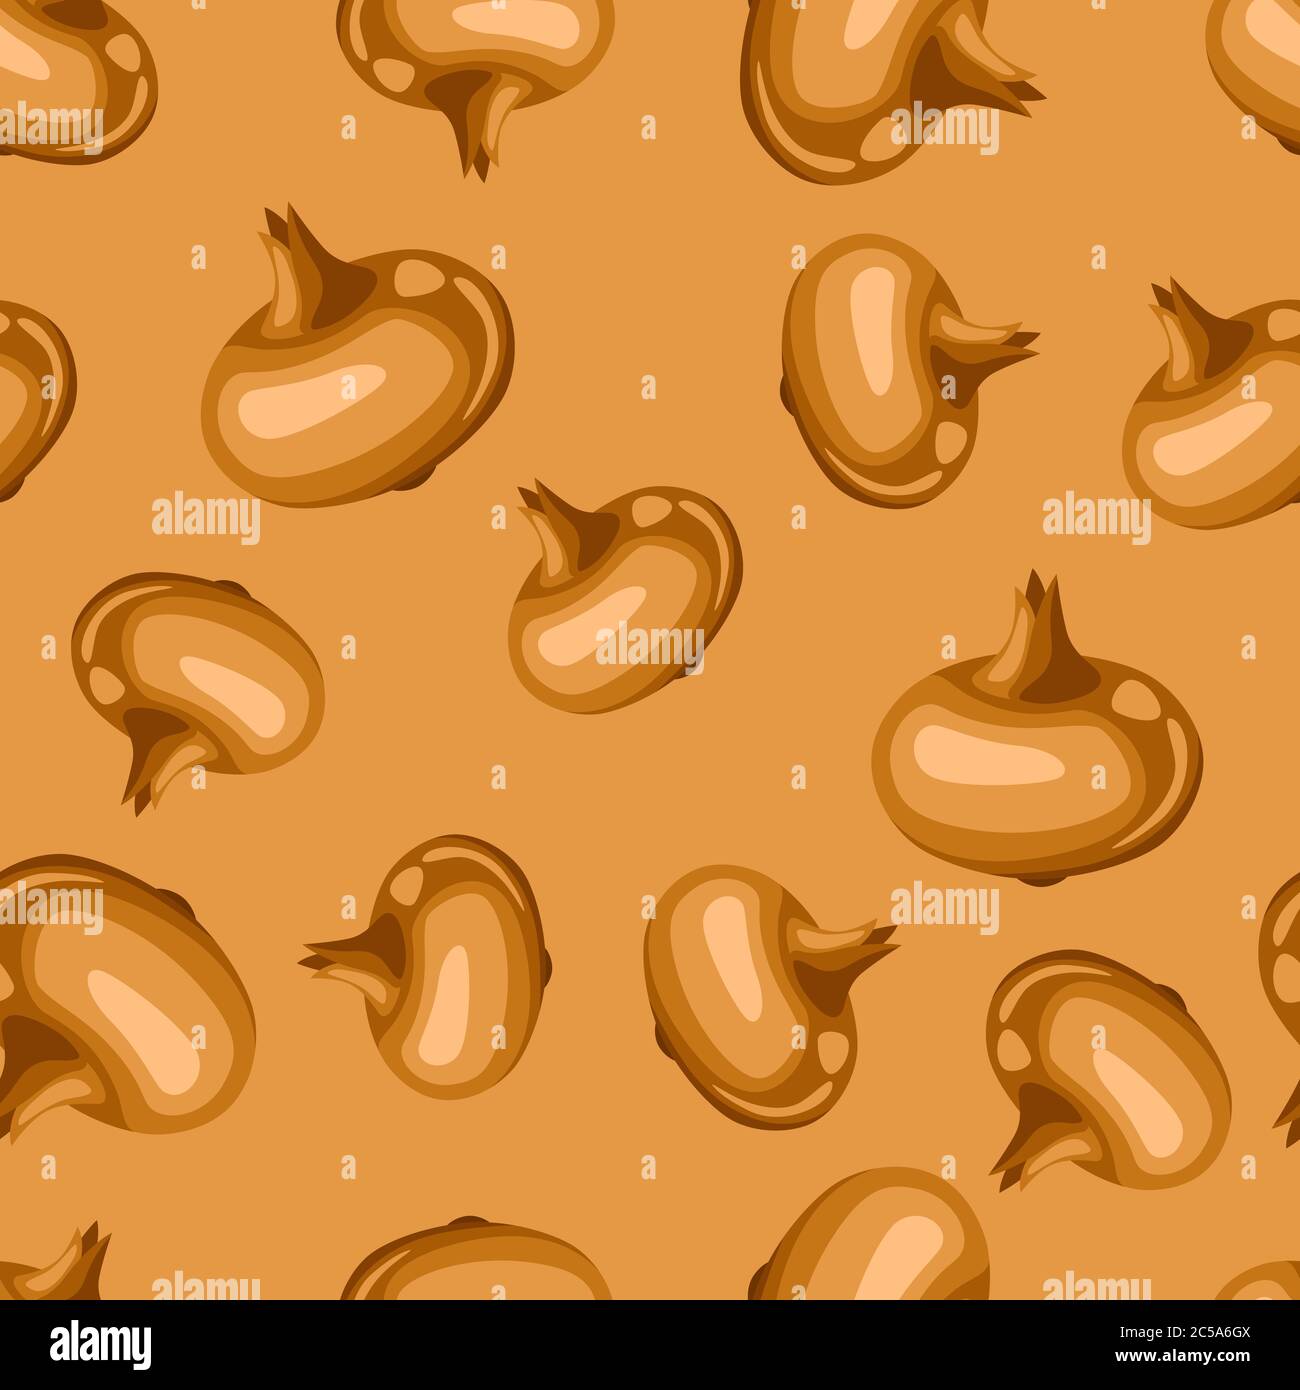 Seamless pattern with of golden ripe onion. Stock Vector